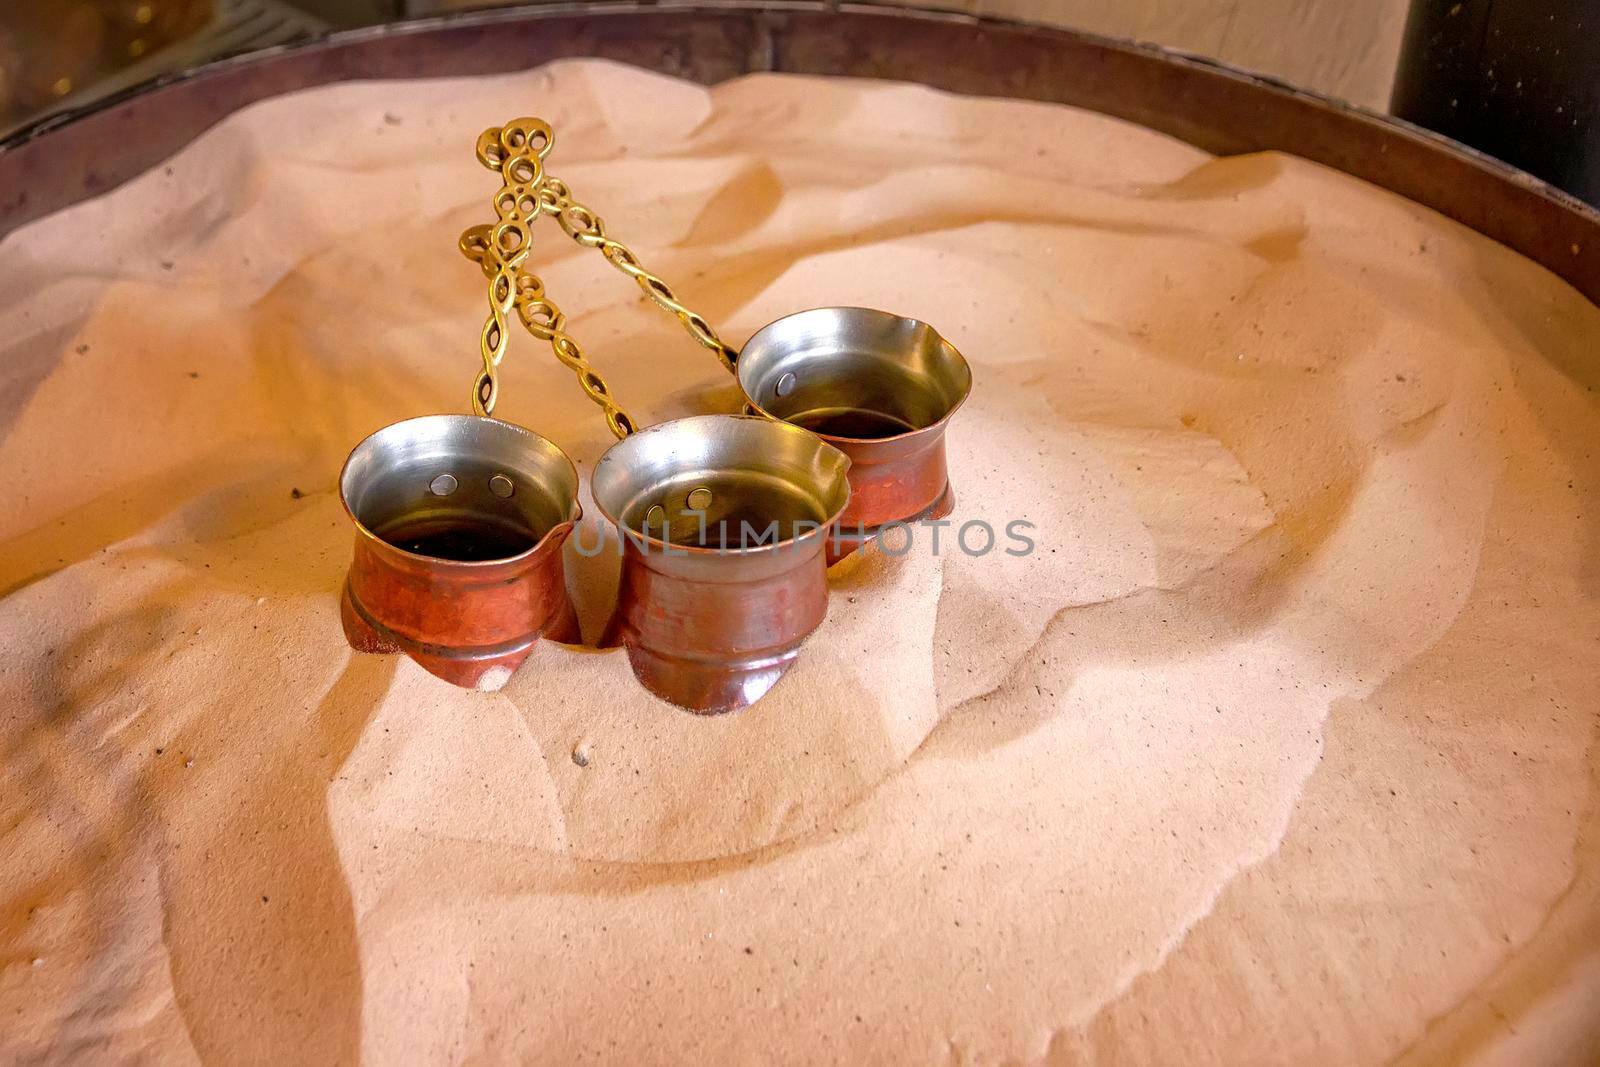 Turkish coffee is made in a traditional way. The copper coffee pots on the hot sand by EdVal